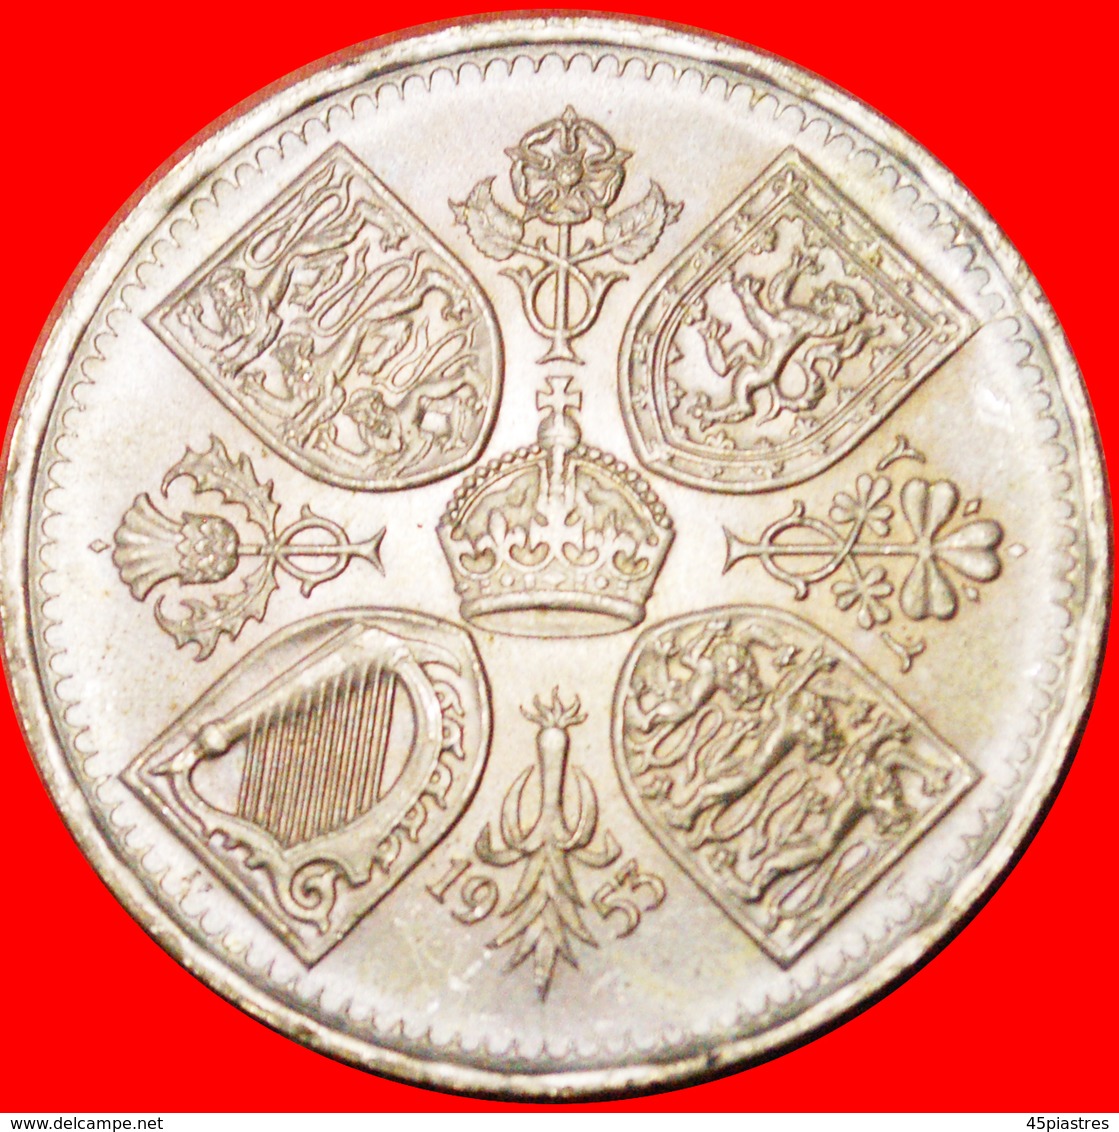 # CORONATION CROWN: GREAT BRITAIN ★ 5 SHILLINGS 1953 FIRST CROWN OF ELIZABETH II UNC MINT LUSTER★LOW START ★ NO RESERVE! - Maundy Sets & Commemorative